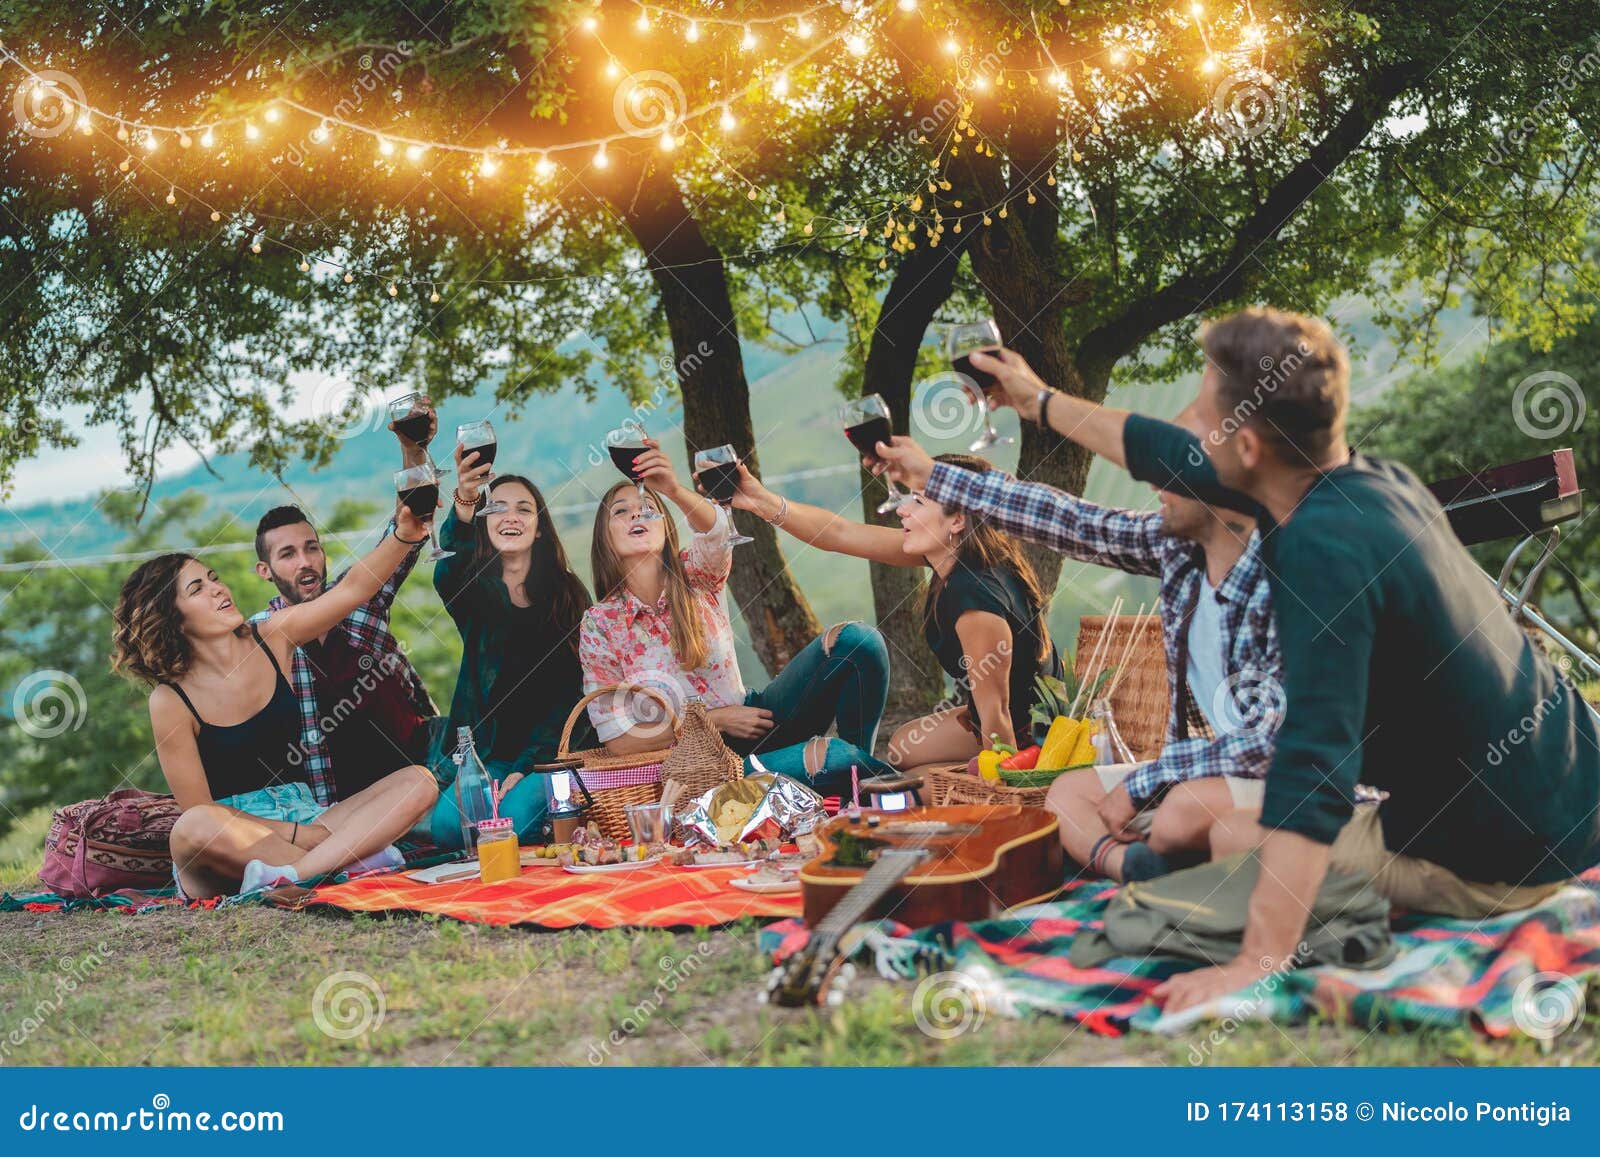 Happy Friends Having Fun at Picnic Dinner with Vintage Lights Outdoor Next Vineyard - Cheering Red Wine on Stock Photo - Image of cheering: 174113158